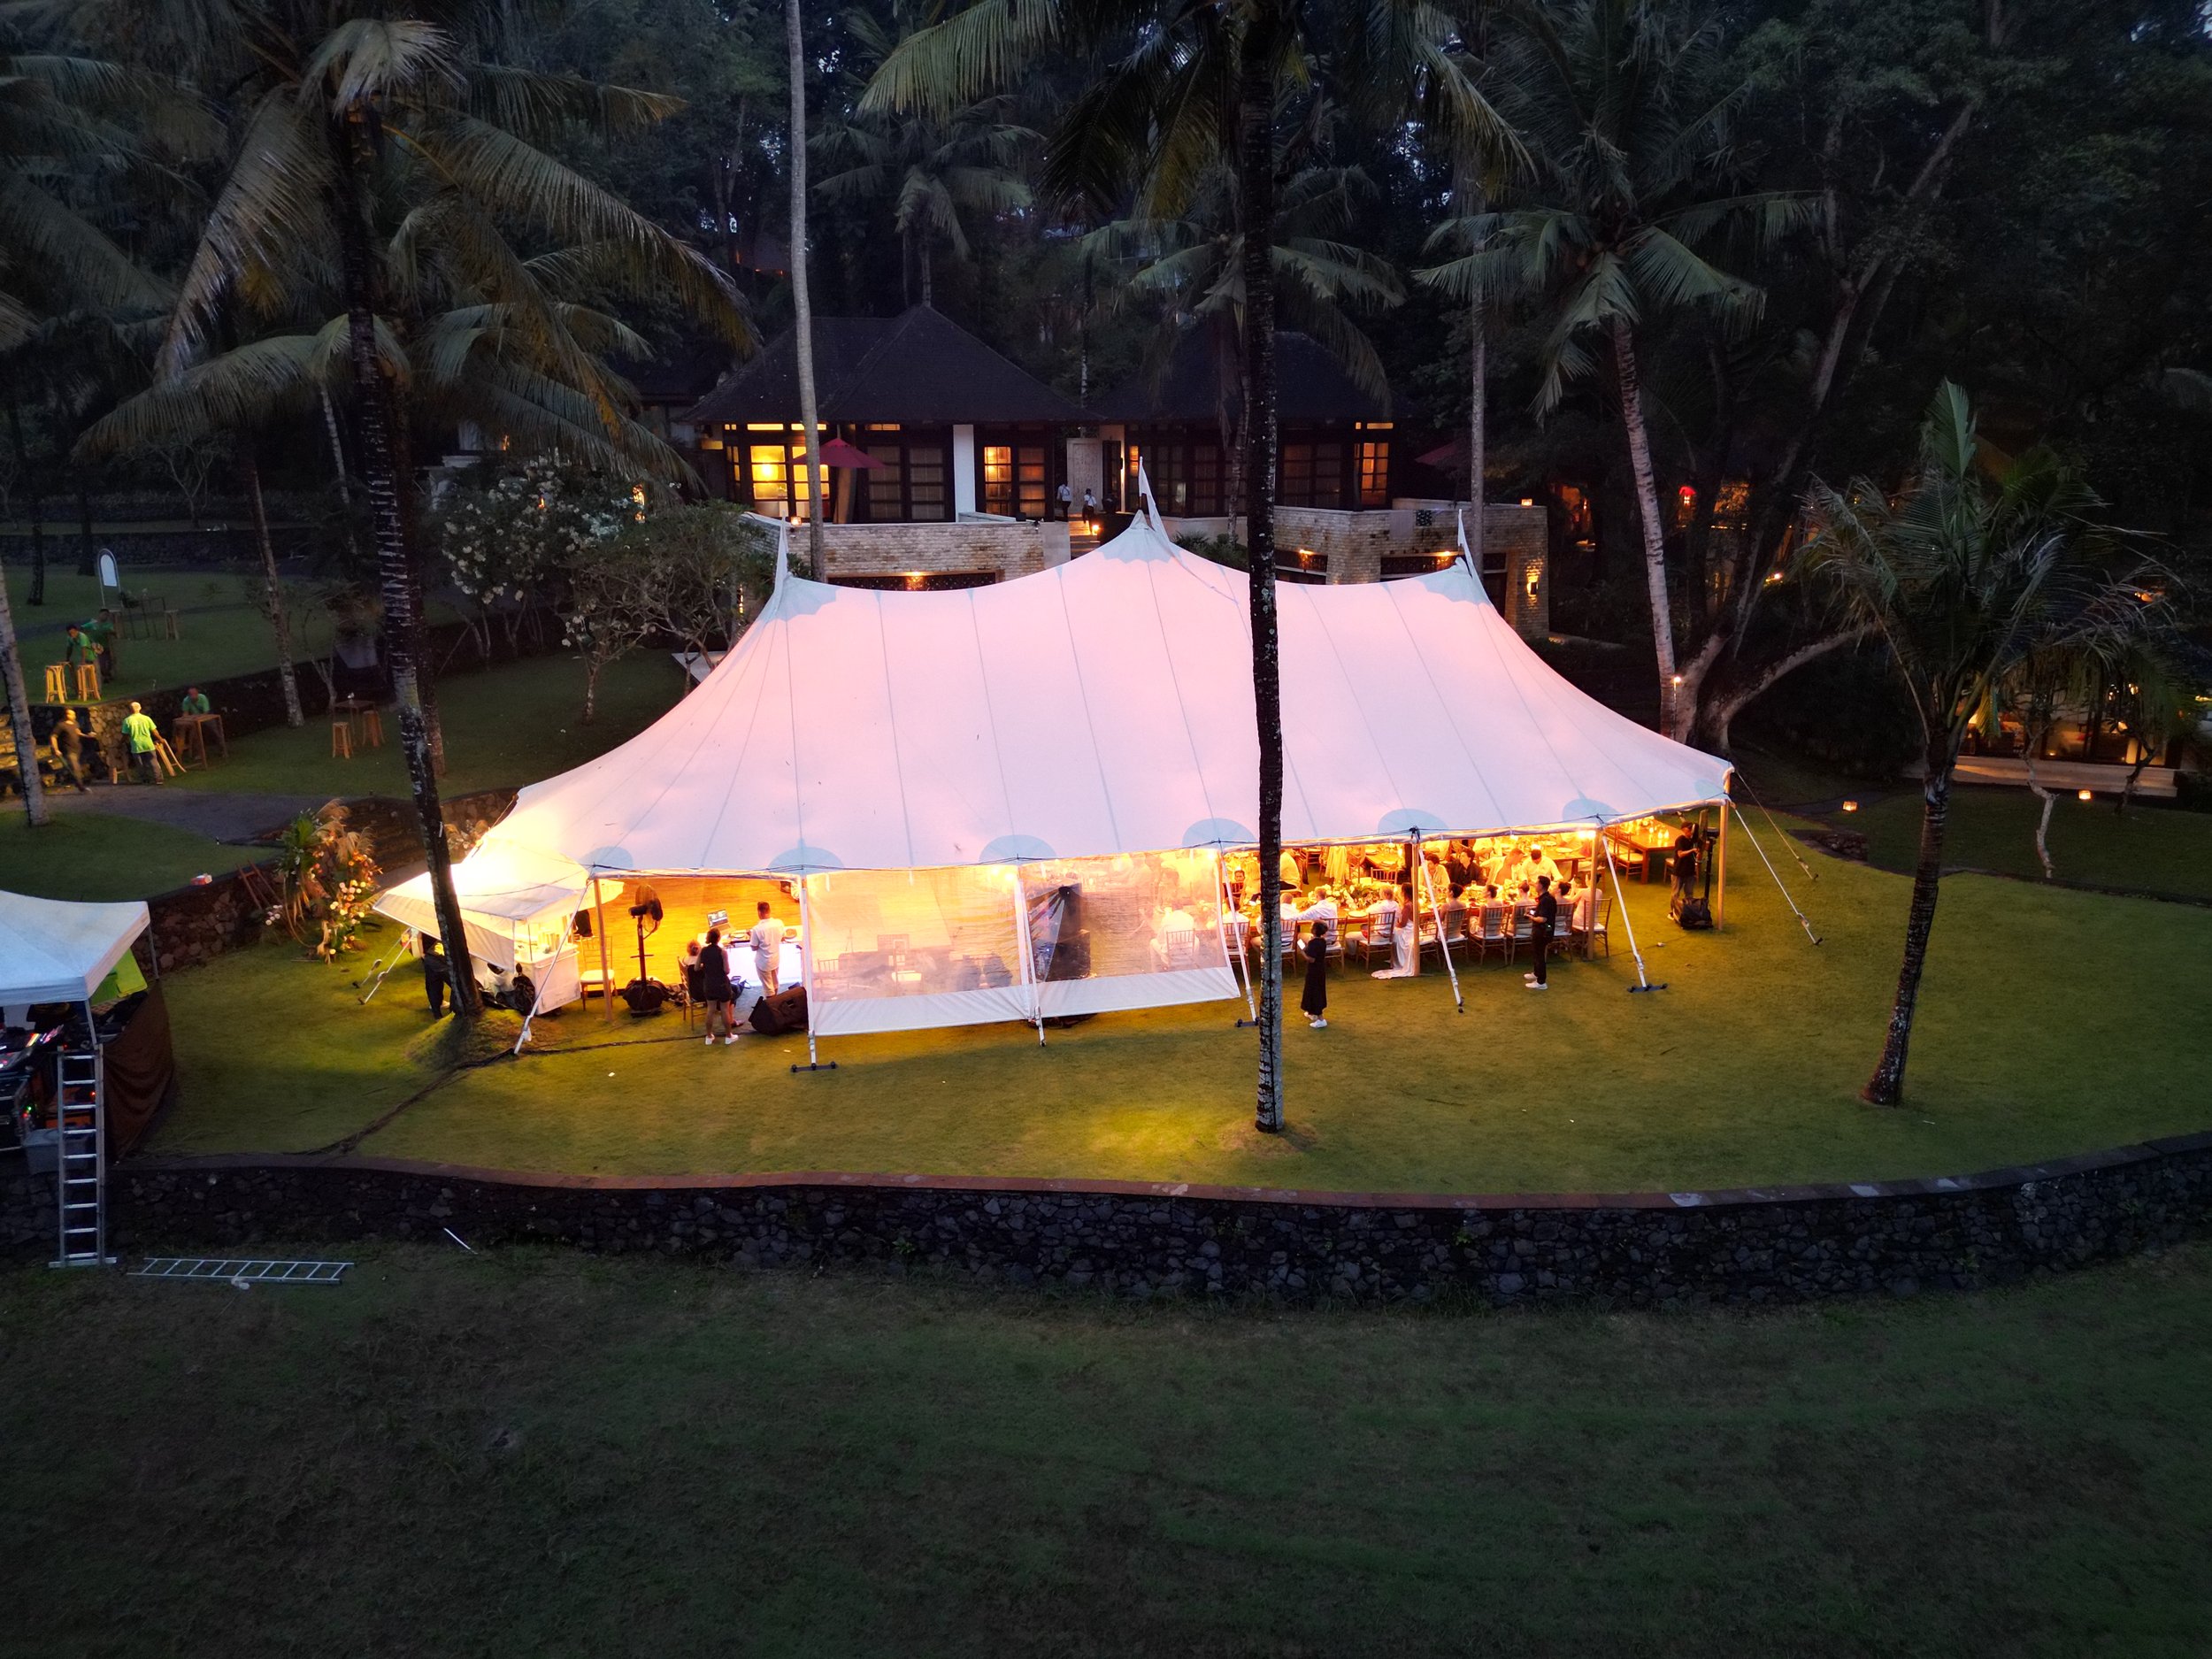 Spacious and Picturesque Setting, Image from A Tent in Bali